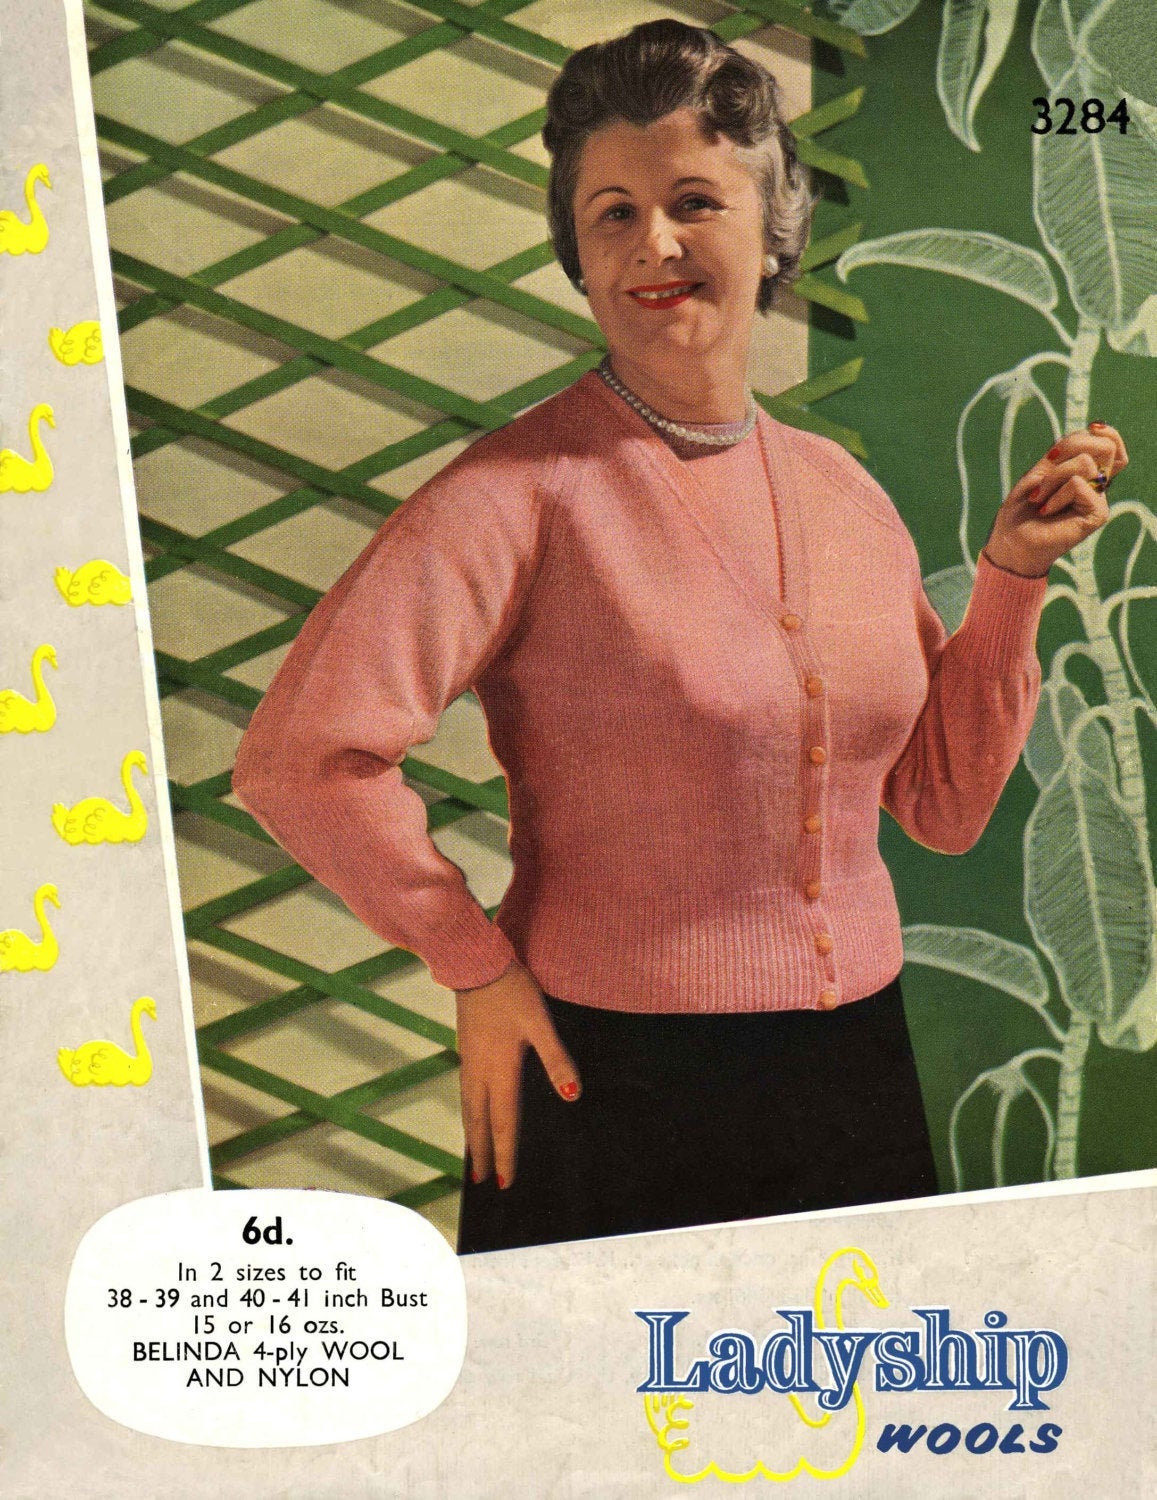 Ladies Twin Set, Cardigan and Jumper, 38"-41" Bust, 4ply, 50s Knitting Pattern, Ladyship 3284